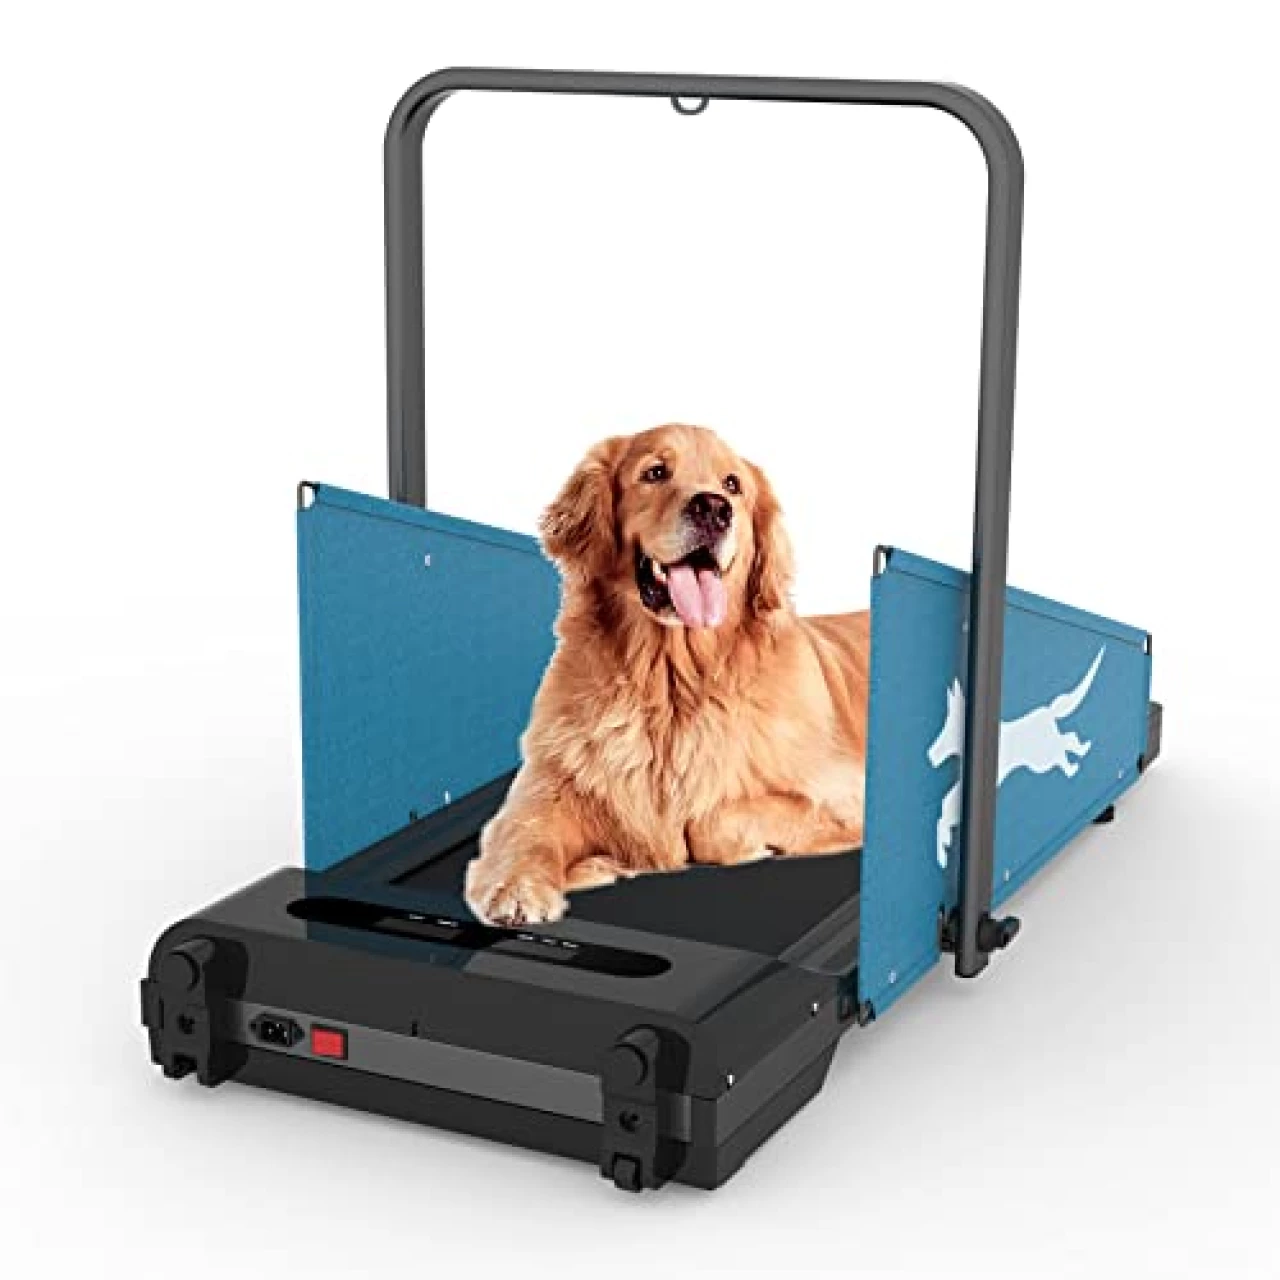 Dog Treadmill Small Dogs/Medium Dogs, 2 in 1 Design-Walking Mode/Pet Mode, Dog Pacer Treadmill for Healthy &amp; Fit Pets-Dog Treadmill Run Walk for Indoor Training for Dogs up to 220 lb Black